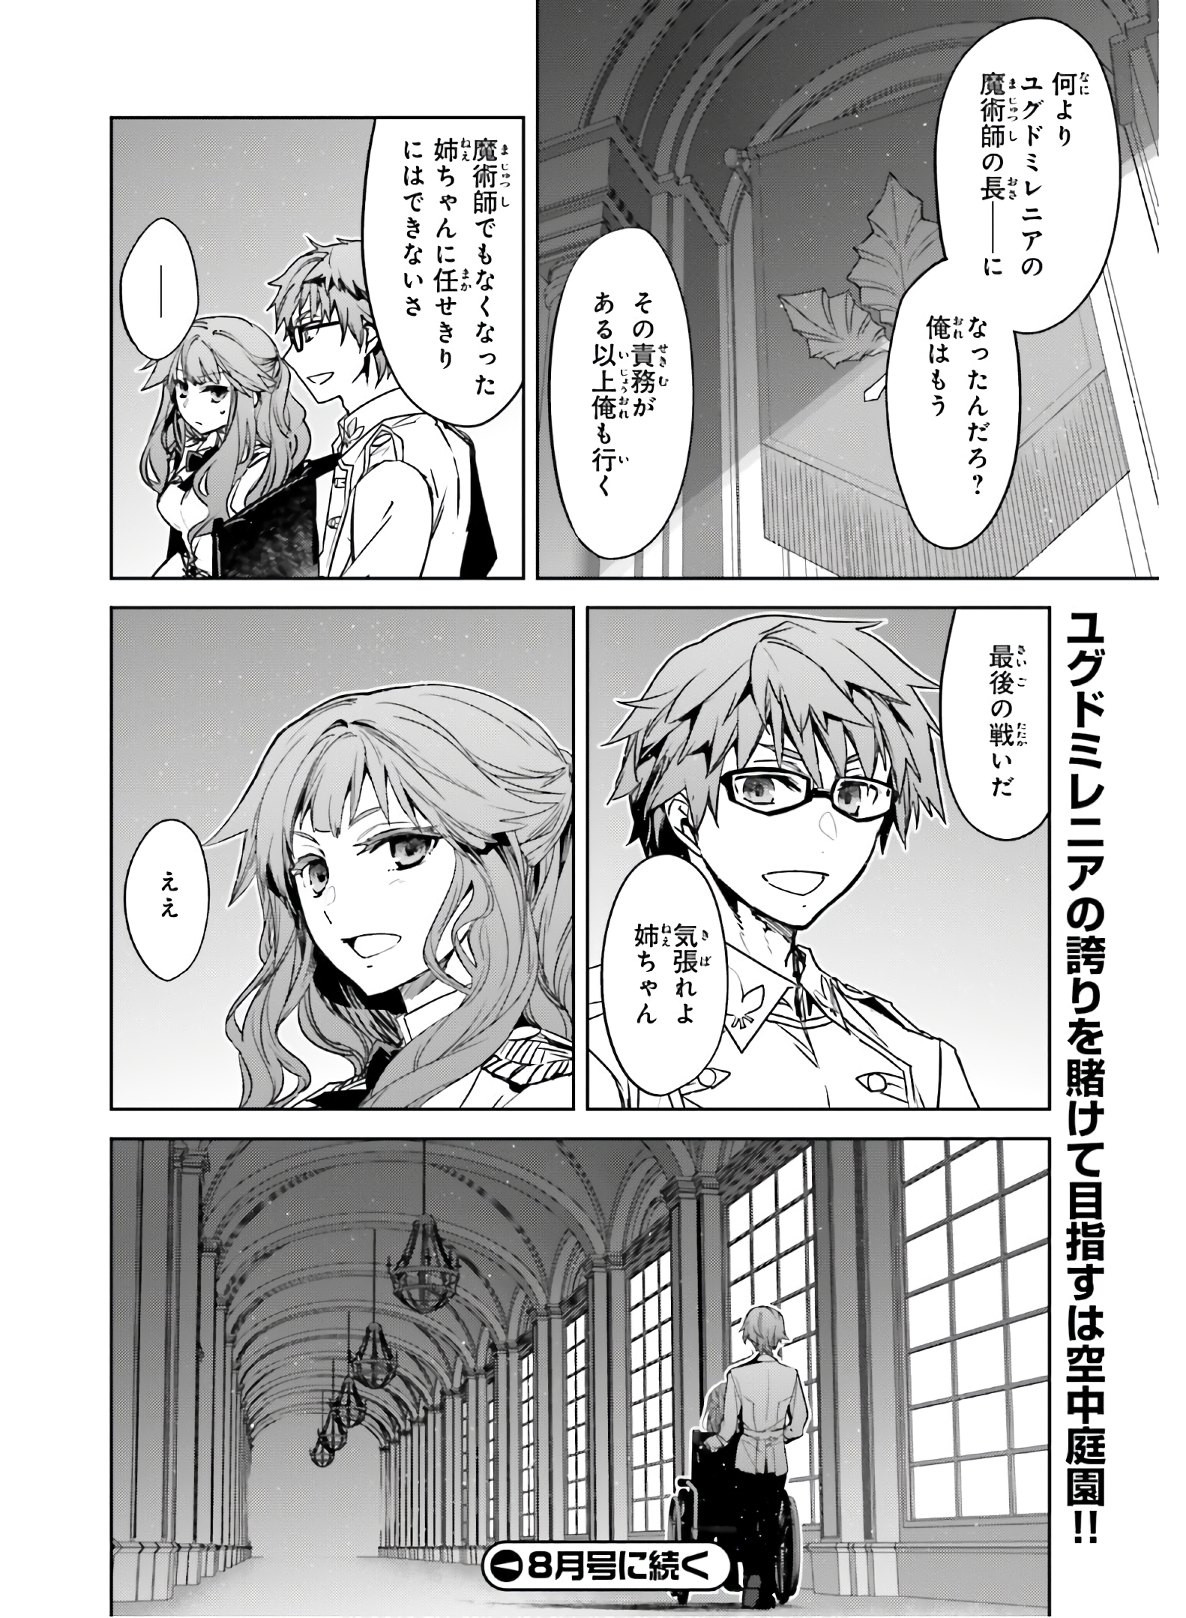 Fate-Apocrypha - Chapter 51 - Page 24